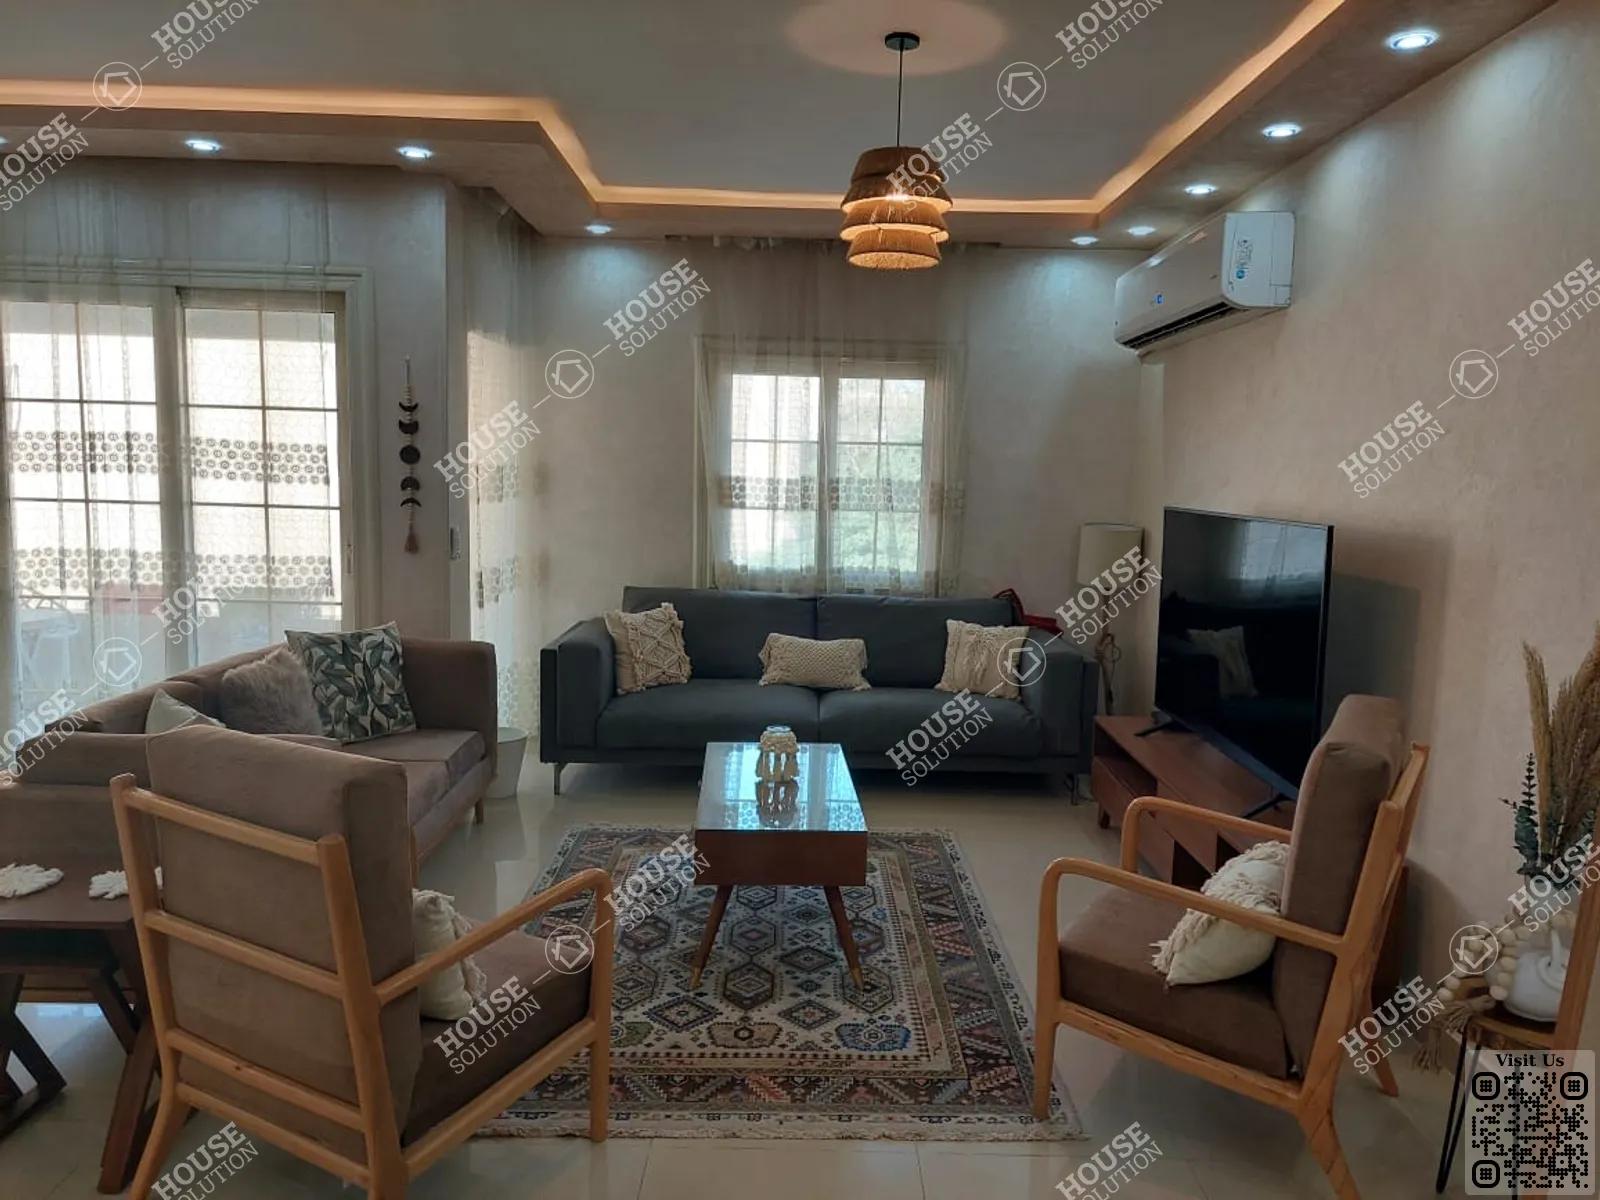 RECEPTION  @ Apartments For Rent In Maadi Maadi Degla Area: 180 m² consists of 3 Bedrooms 2 Bathrooms Modern furnished 5 stars #5500-0